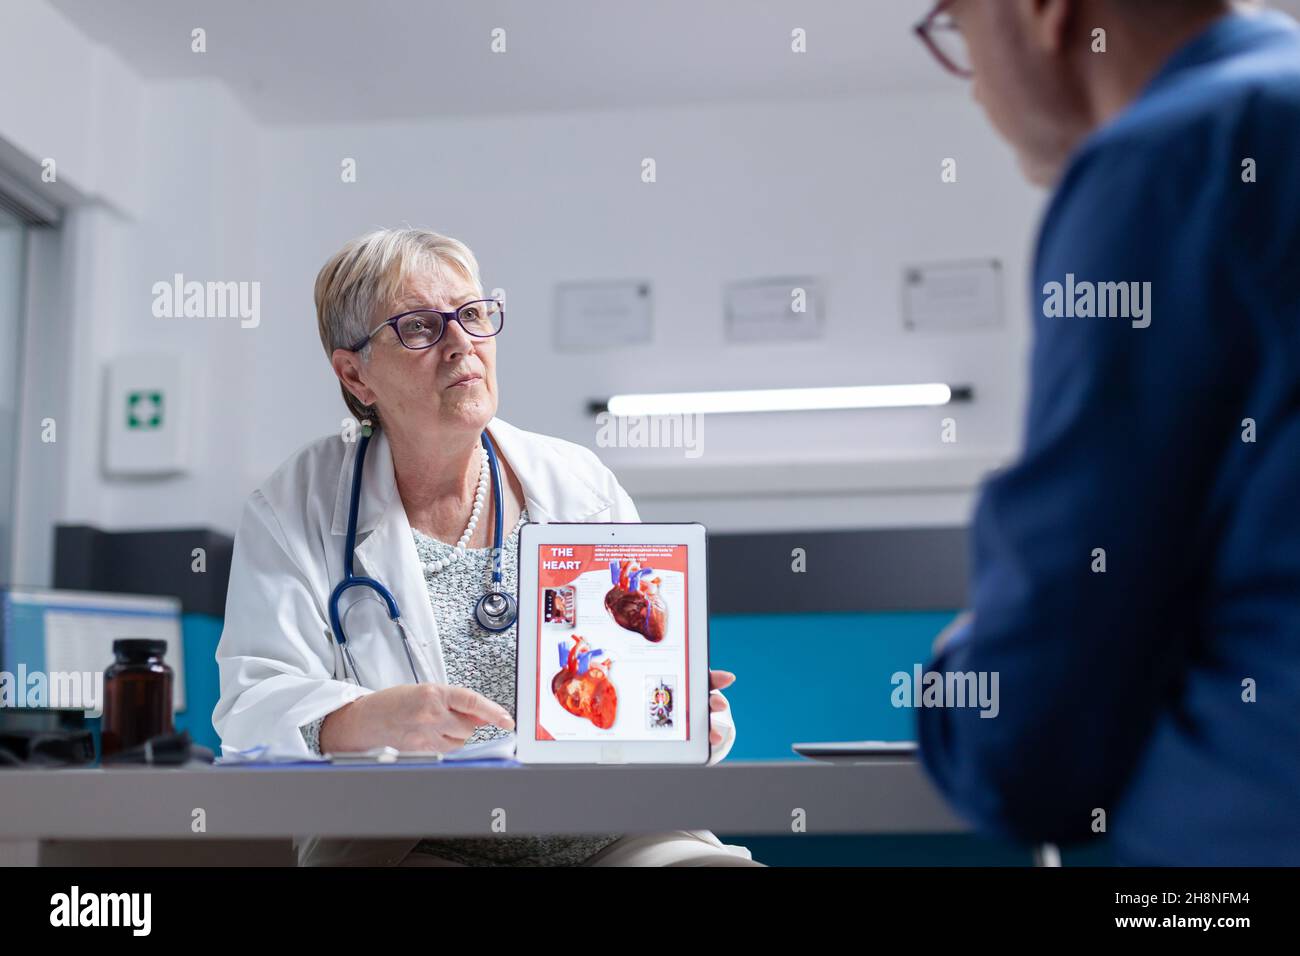 Specialist talking about cardiology diagnosis with image of heart organ on tablet to man. General practitioner showing illustration on cardiovascular system and anatomical structure to patient. Stock Photo